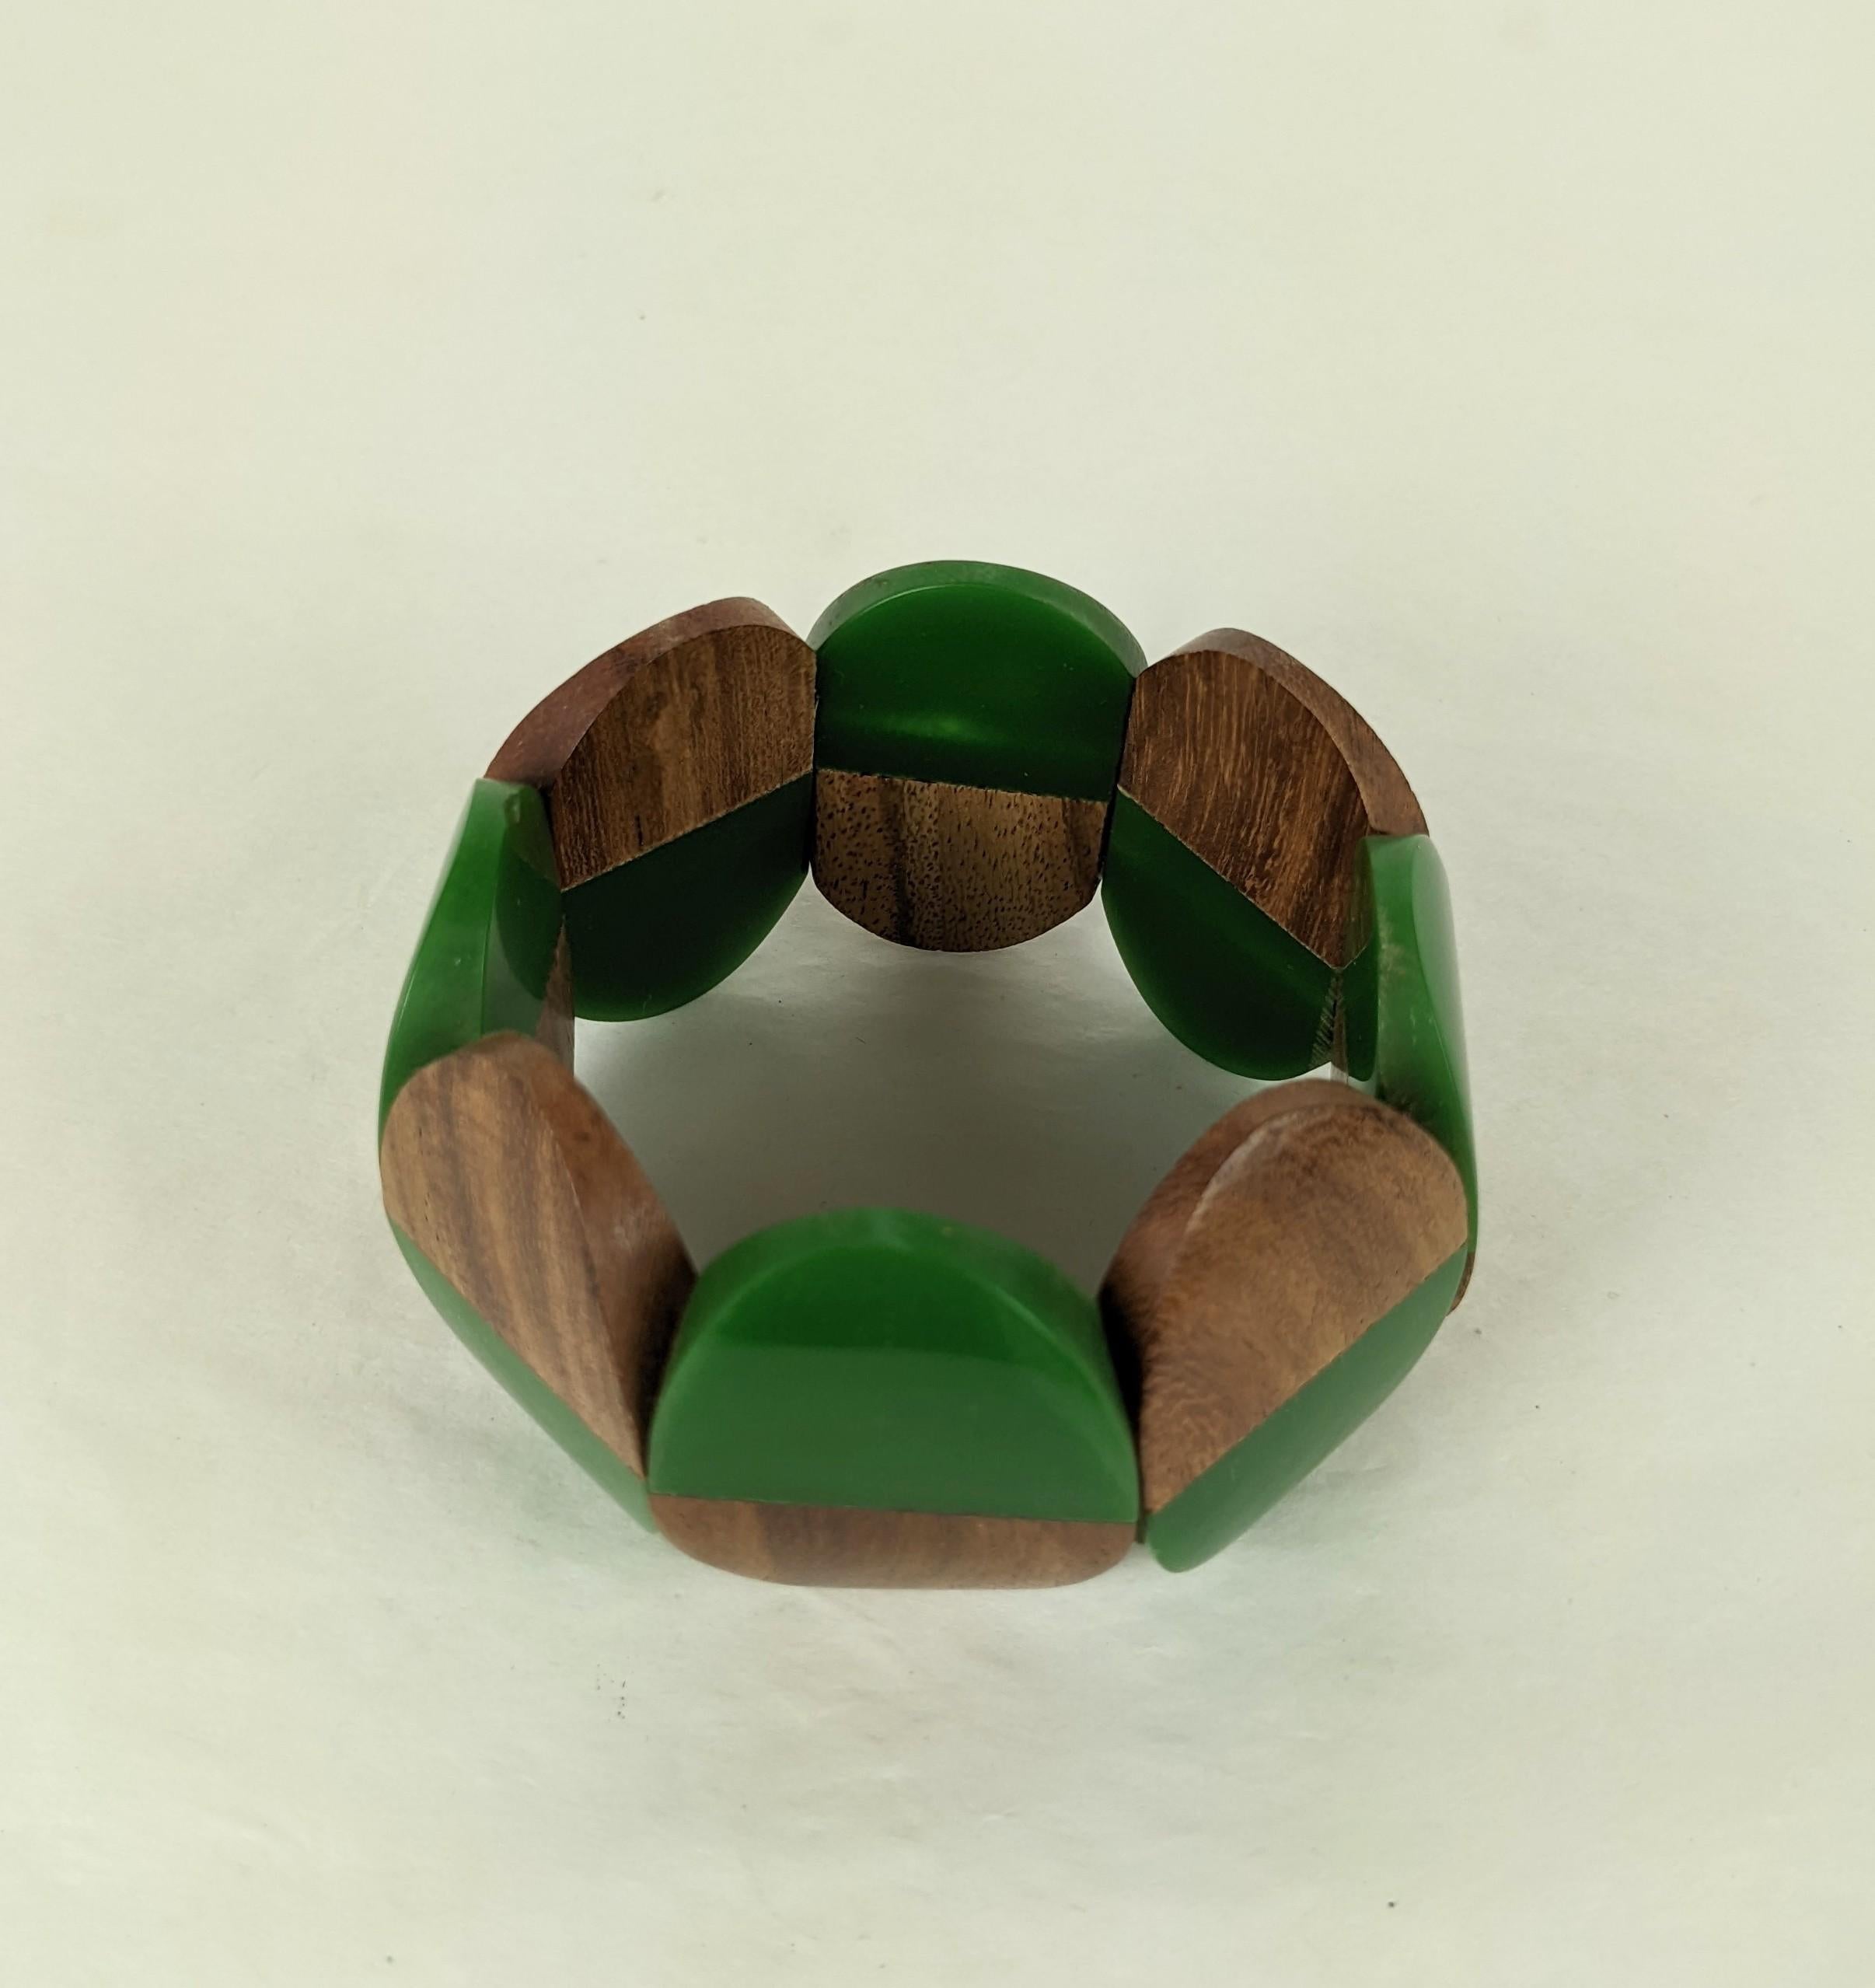 Striking Art Deco French Bakelite and Exotic Wood Laminated Stretch Bracelet from the 1940's. Strung on 2 elastic cords.  1.75